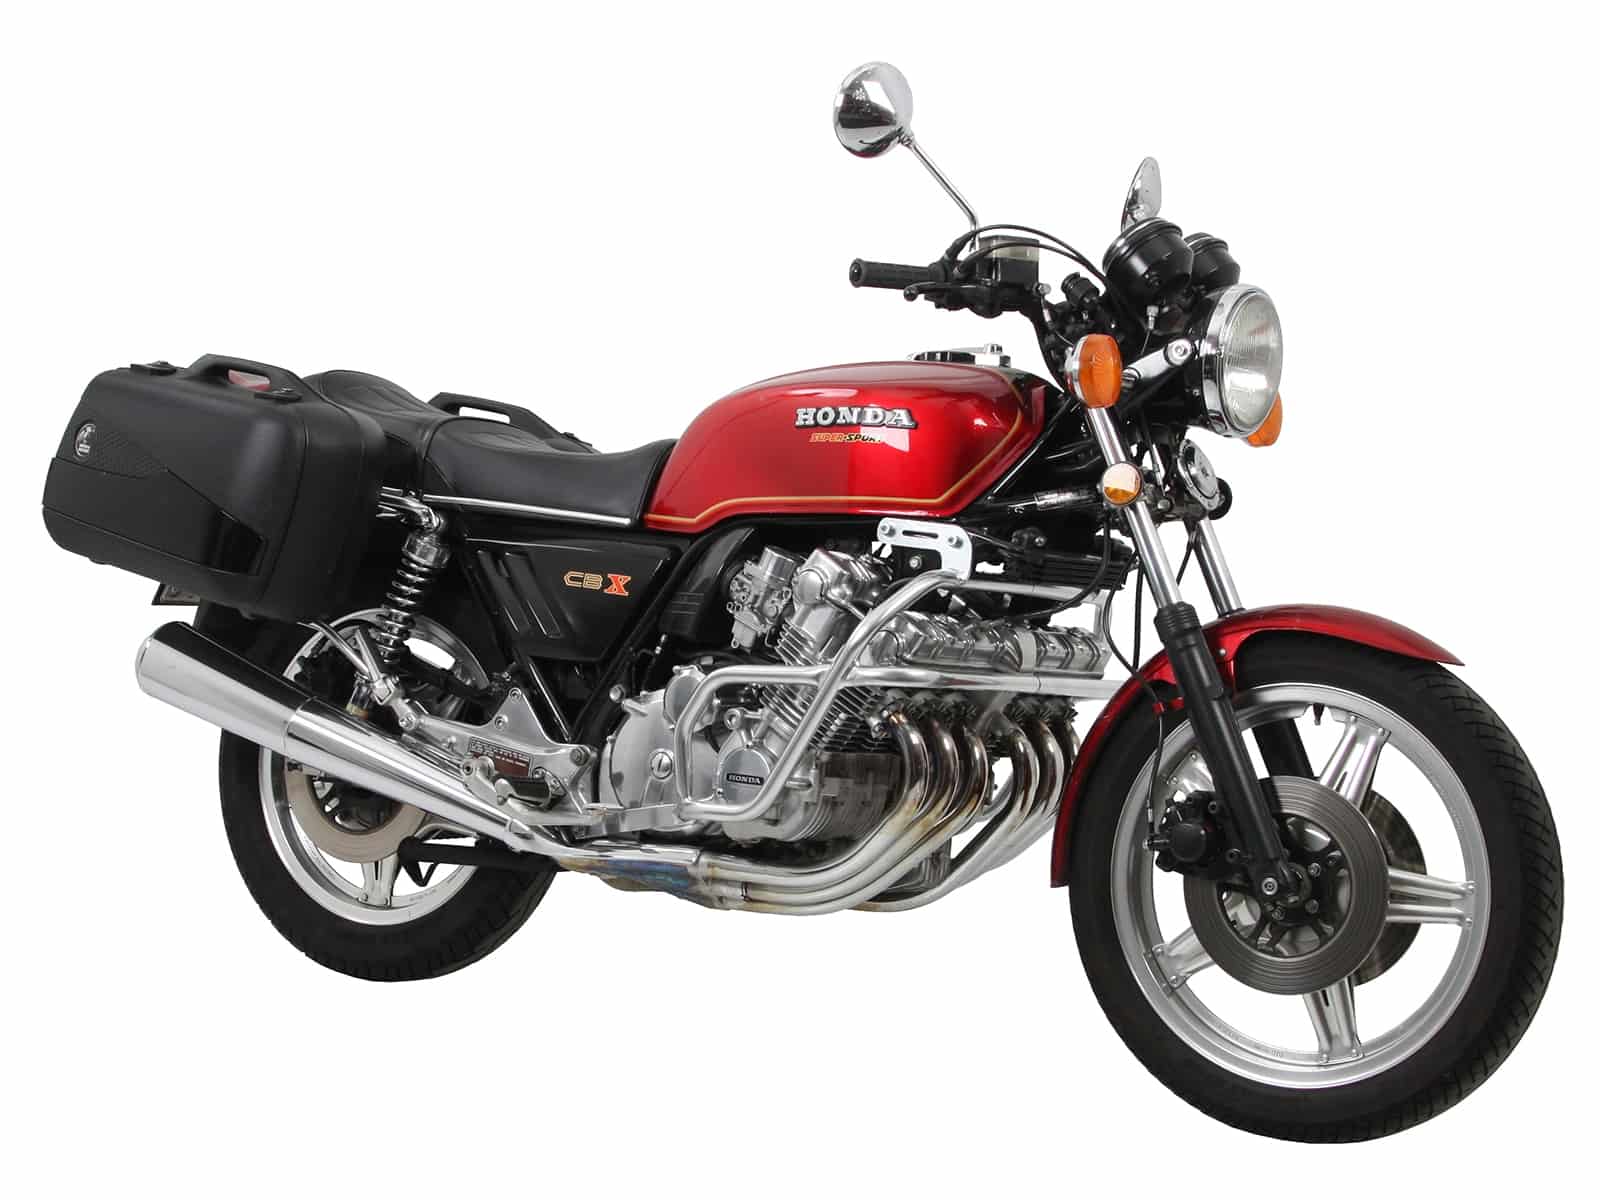 Sidecarrier permanent mounted chrome for Honda CBX 1000 (1978-1980)